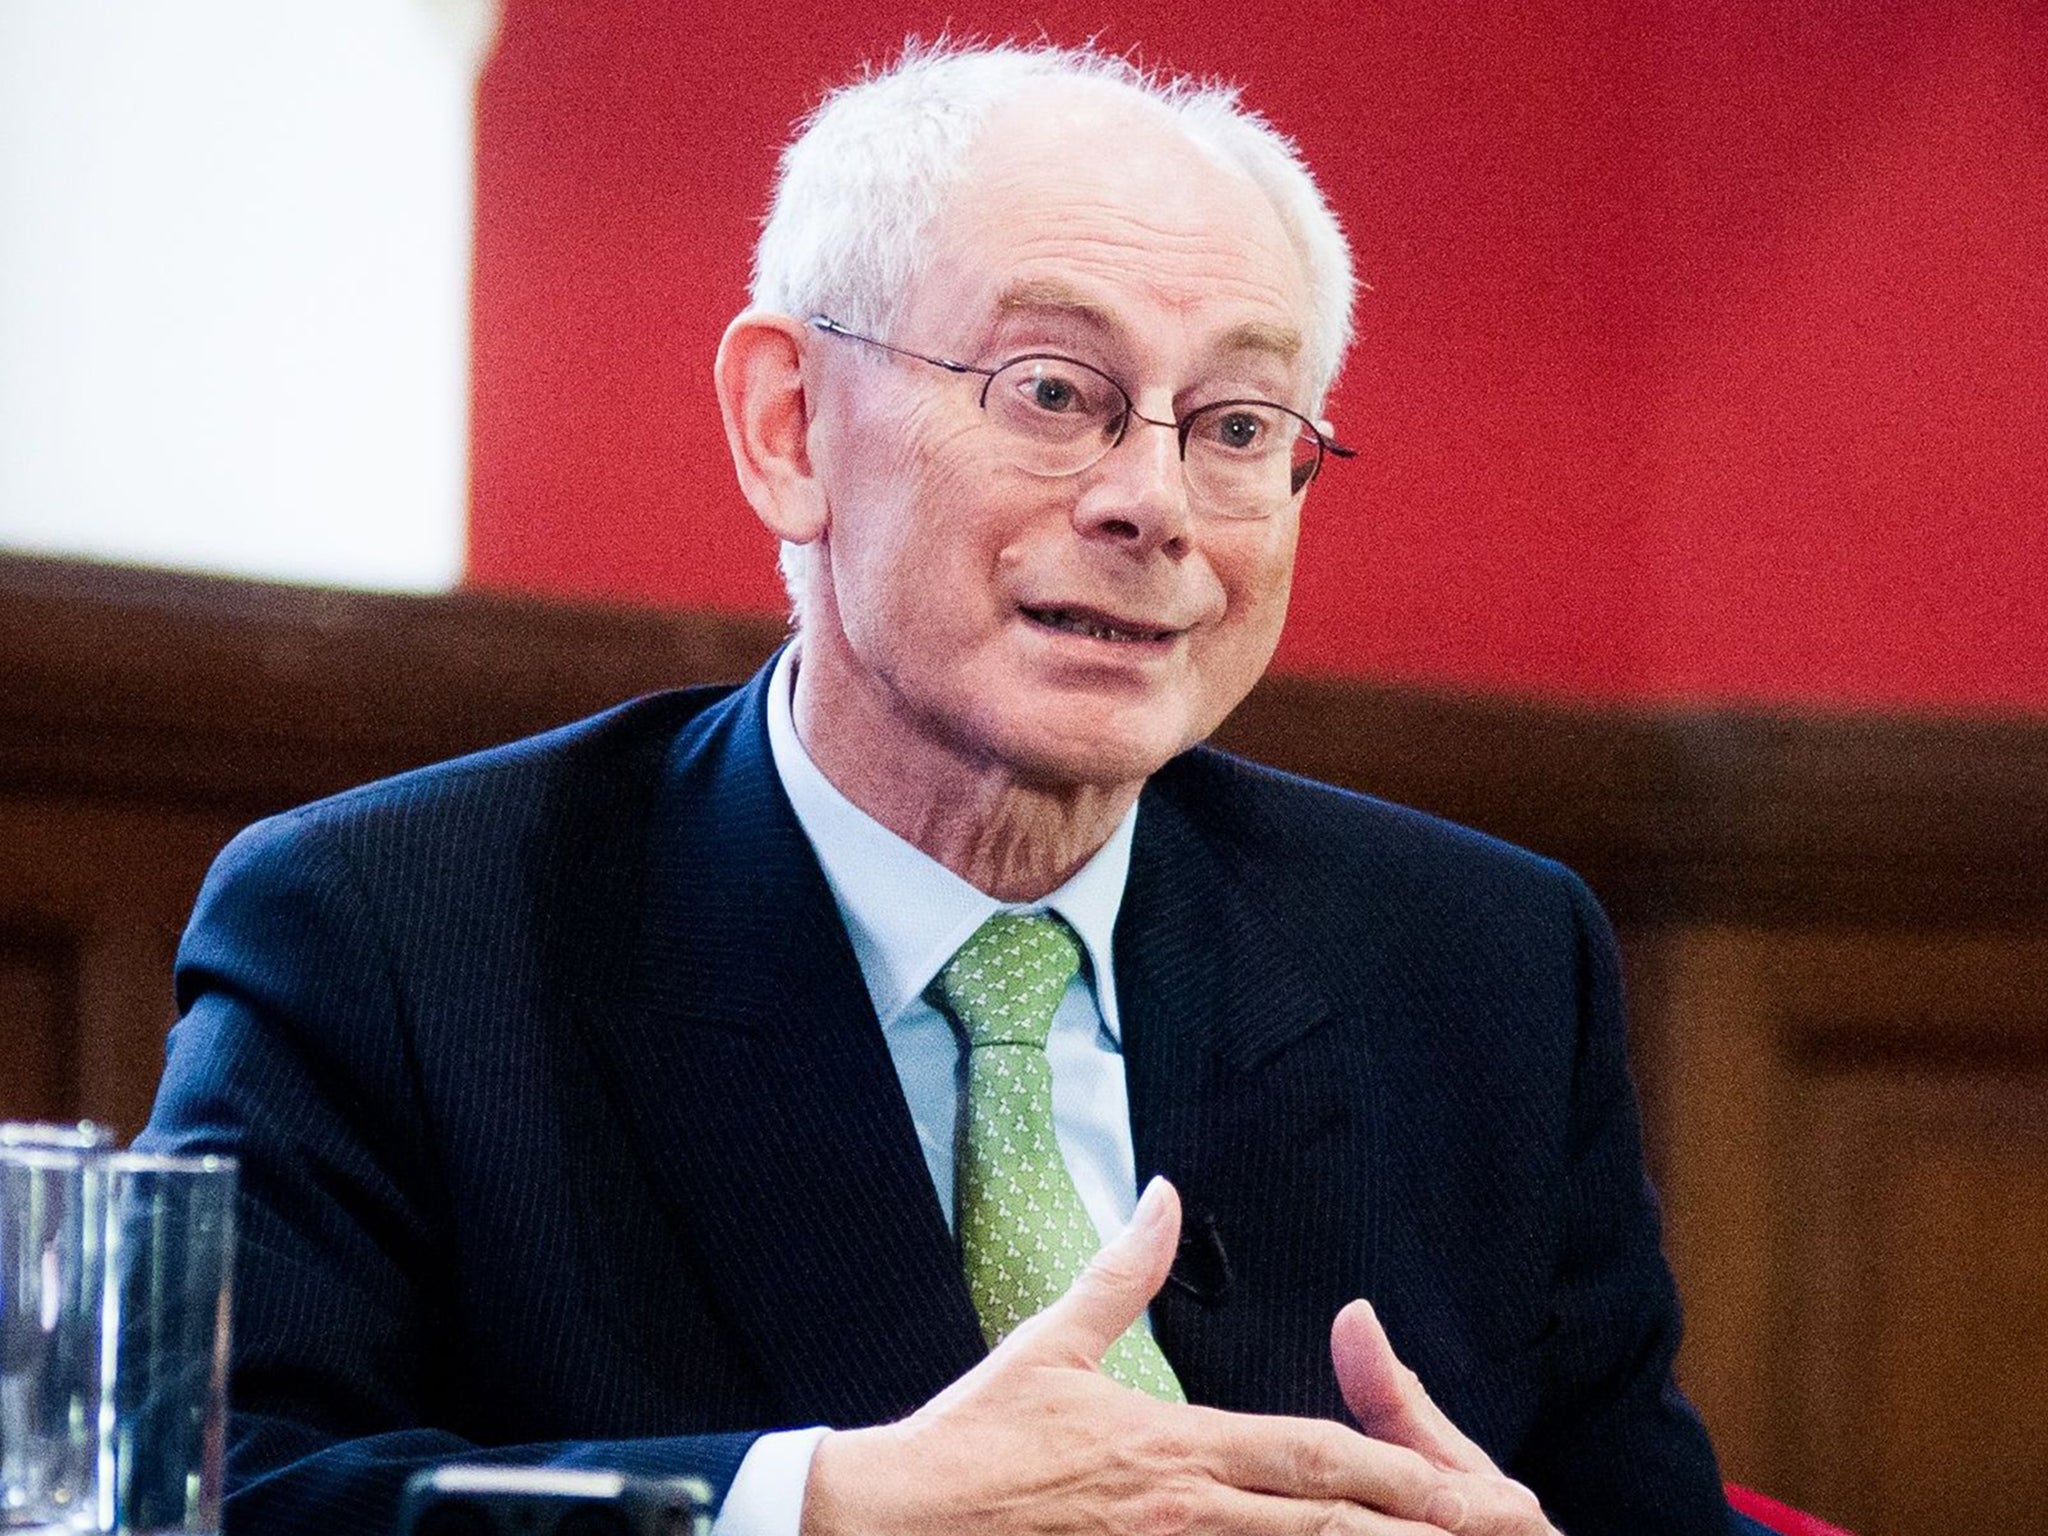 Herman Van Rompuy formerly served as Prime Minister of Belgium and as the first President of the European Council